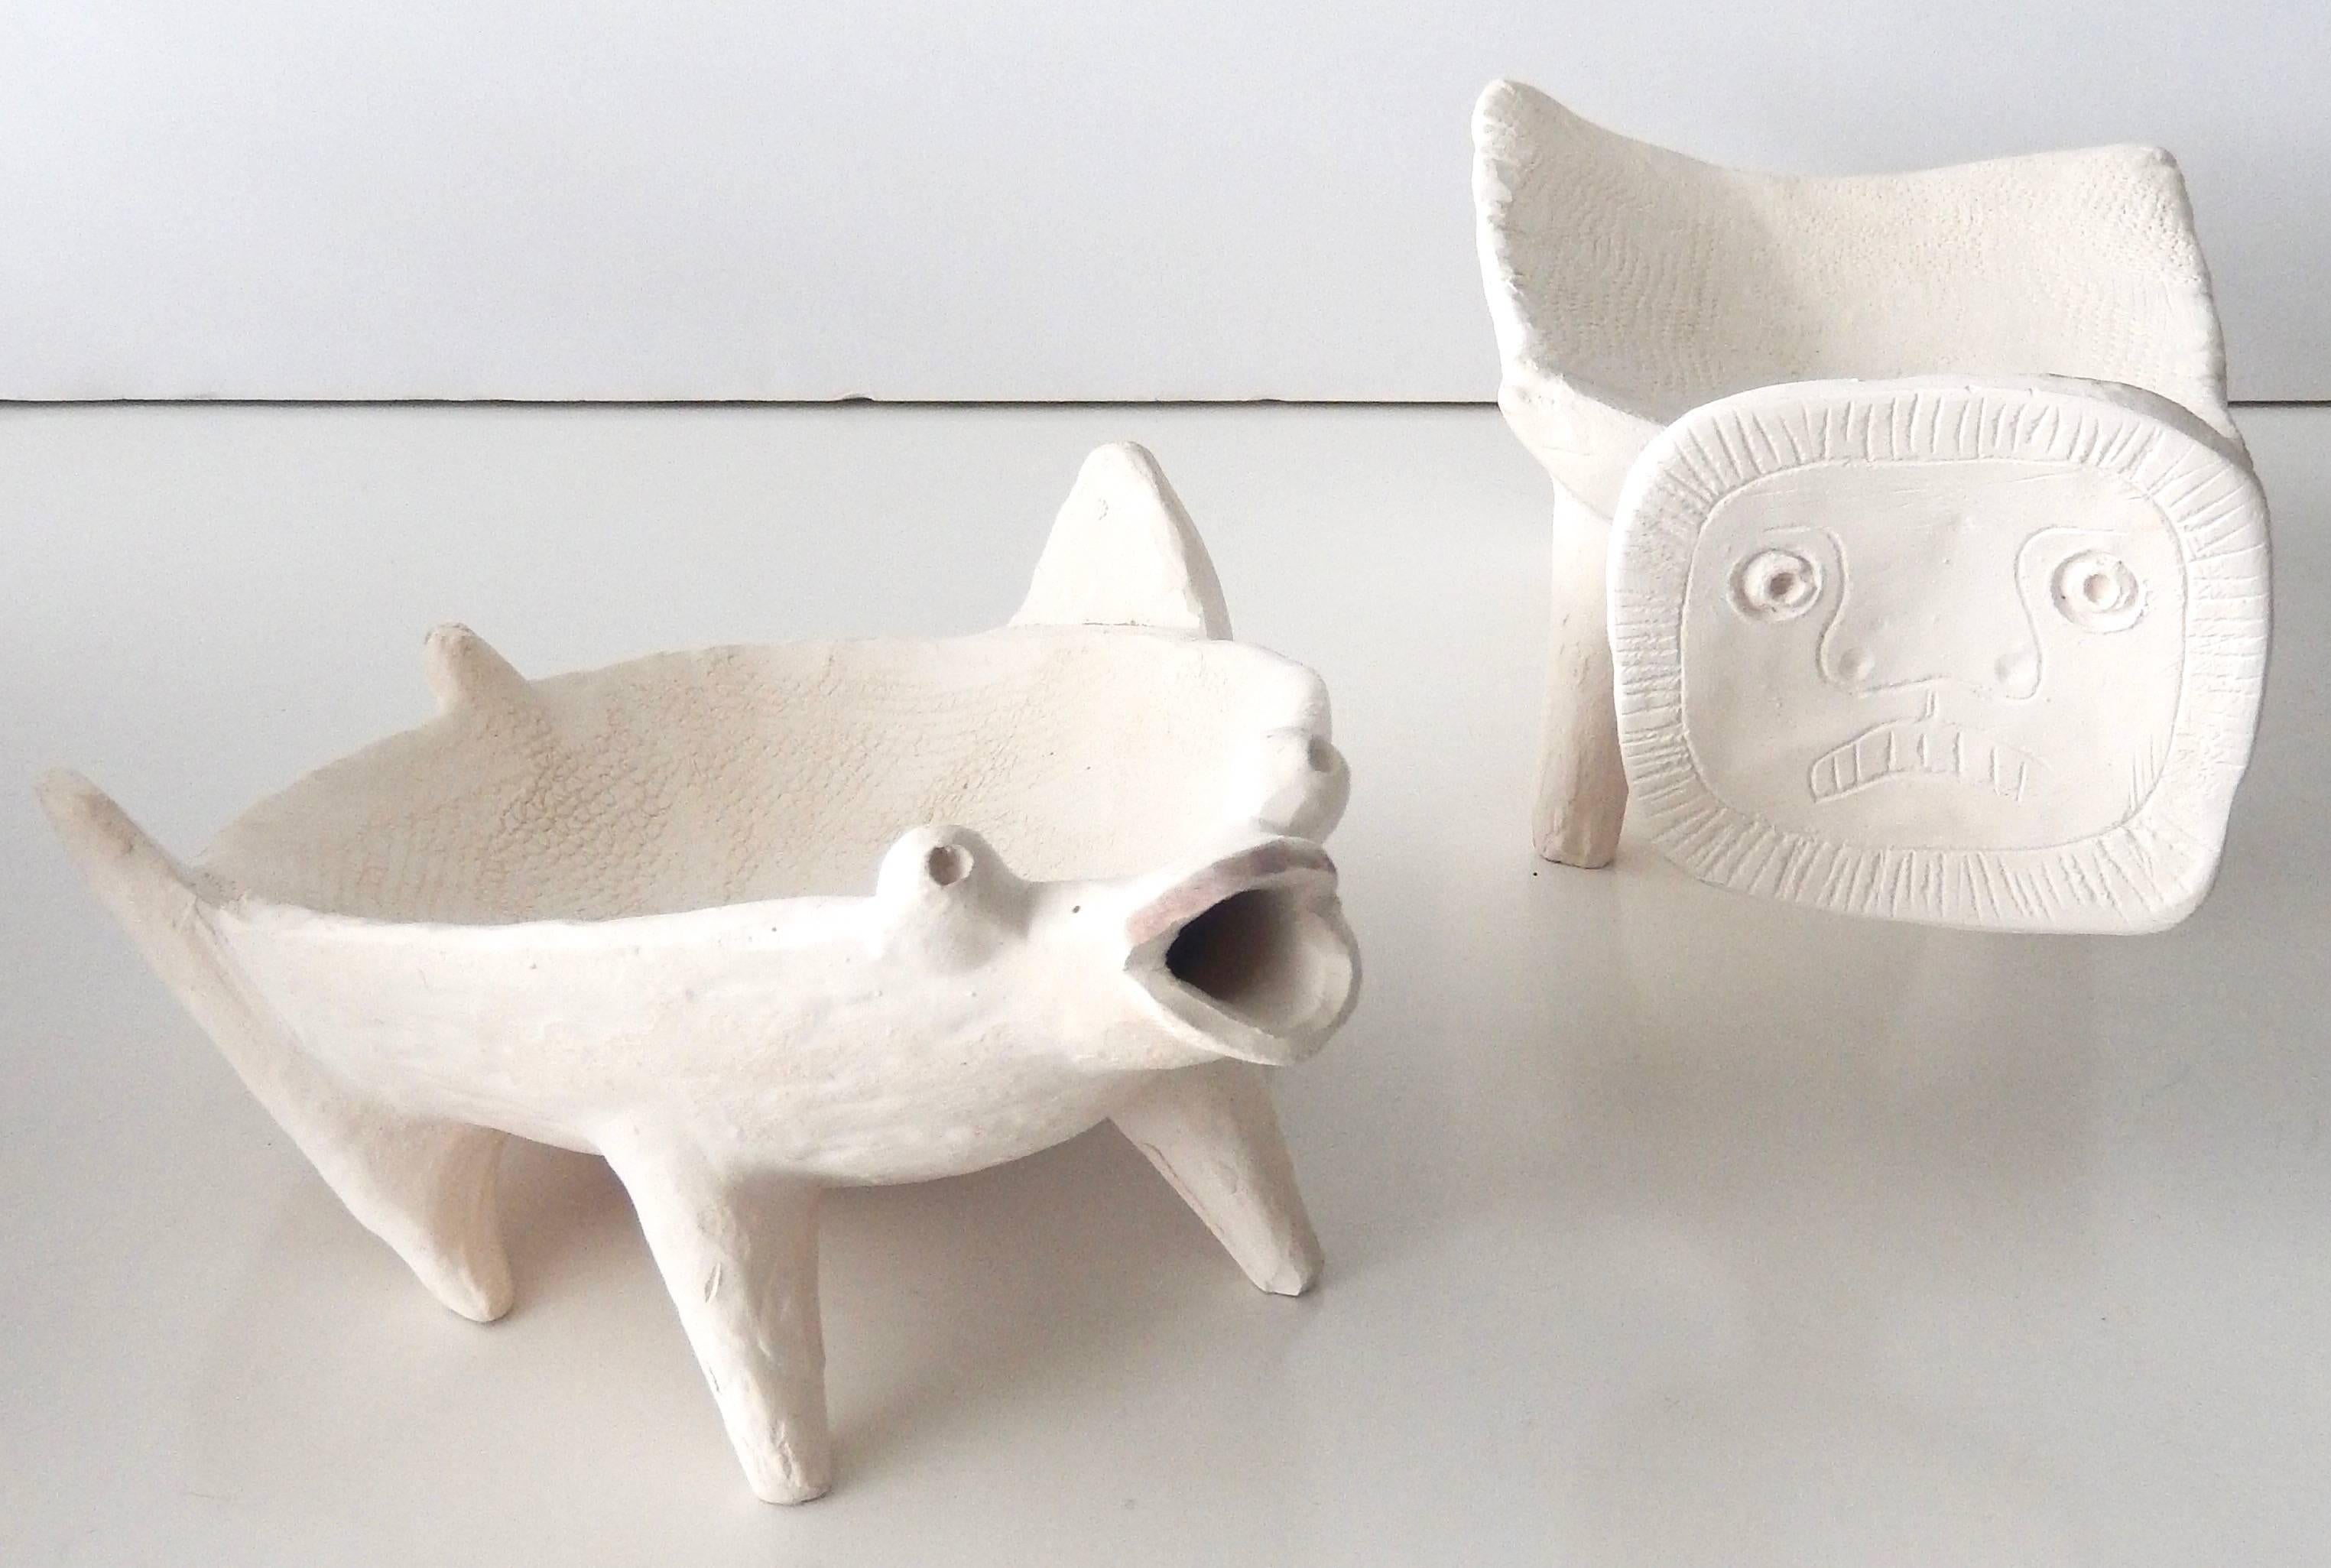 Two stylized animal dishes in biscuit ceramic by the French artist 
Jacques Blin (1920-1995). (Biscuit refers to ceramics that are fired but not glazed.) The zoomorphic forms are imaginative and charming and reflect Blin's interest in simplified